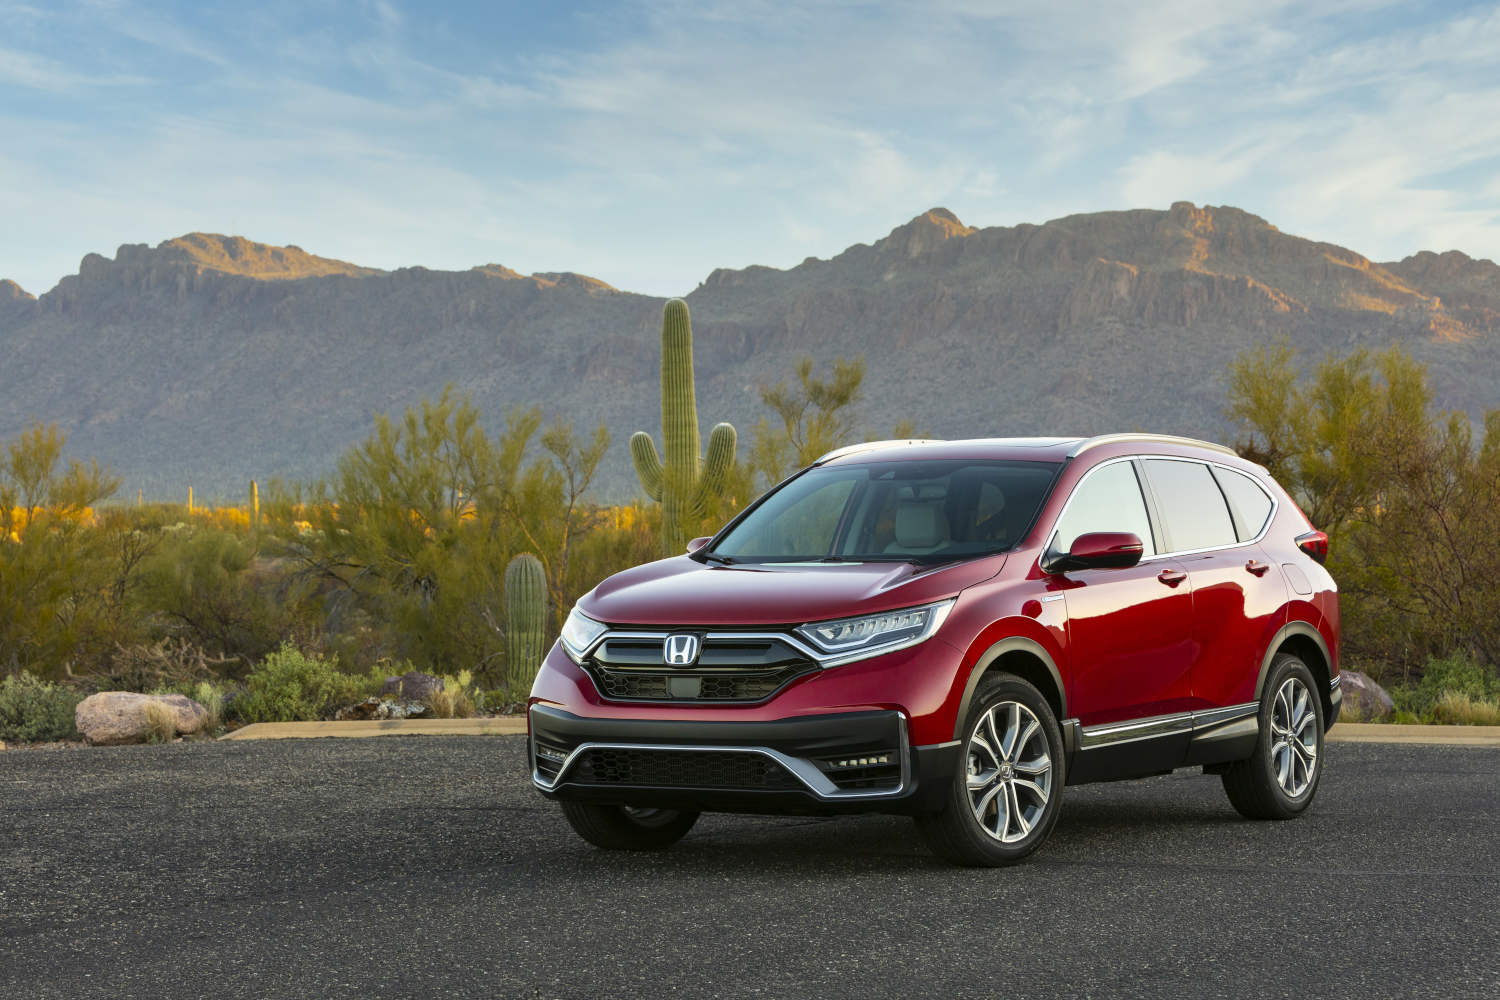 The Honda CR-V is one of the best SUVs